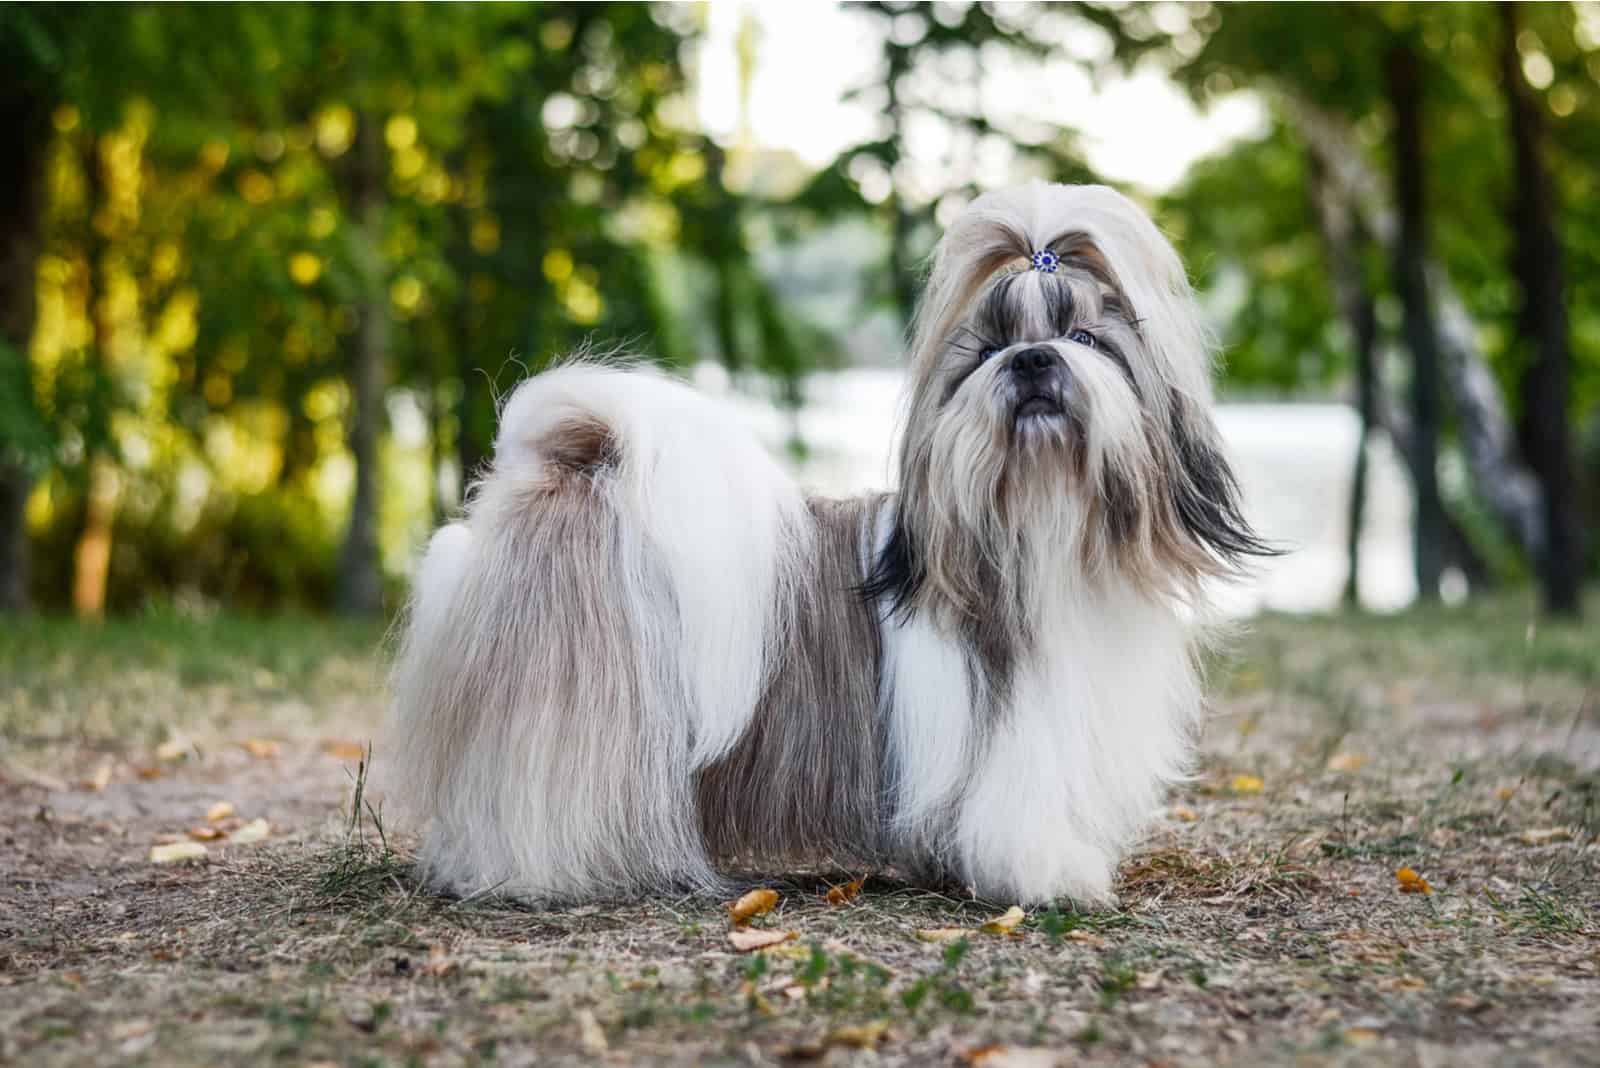 the adorable Shih Tzu stands in the woods